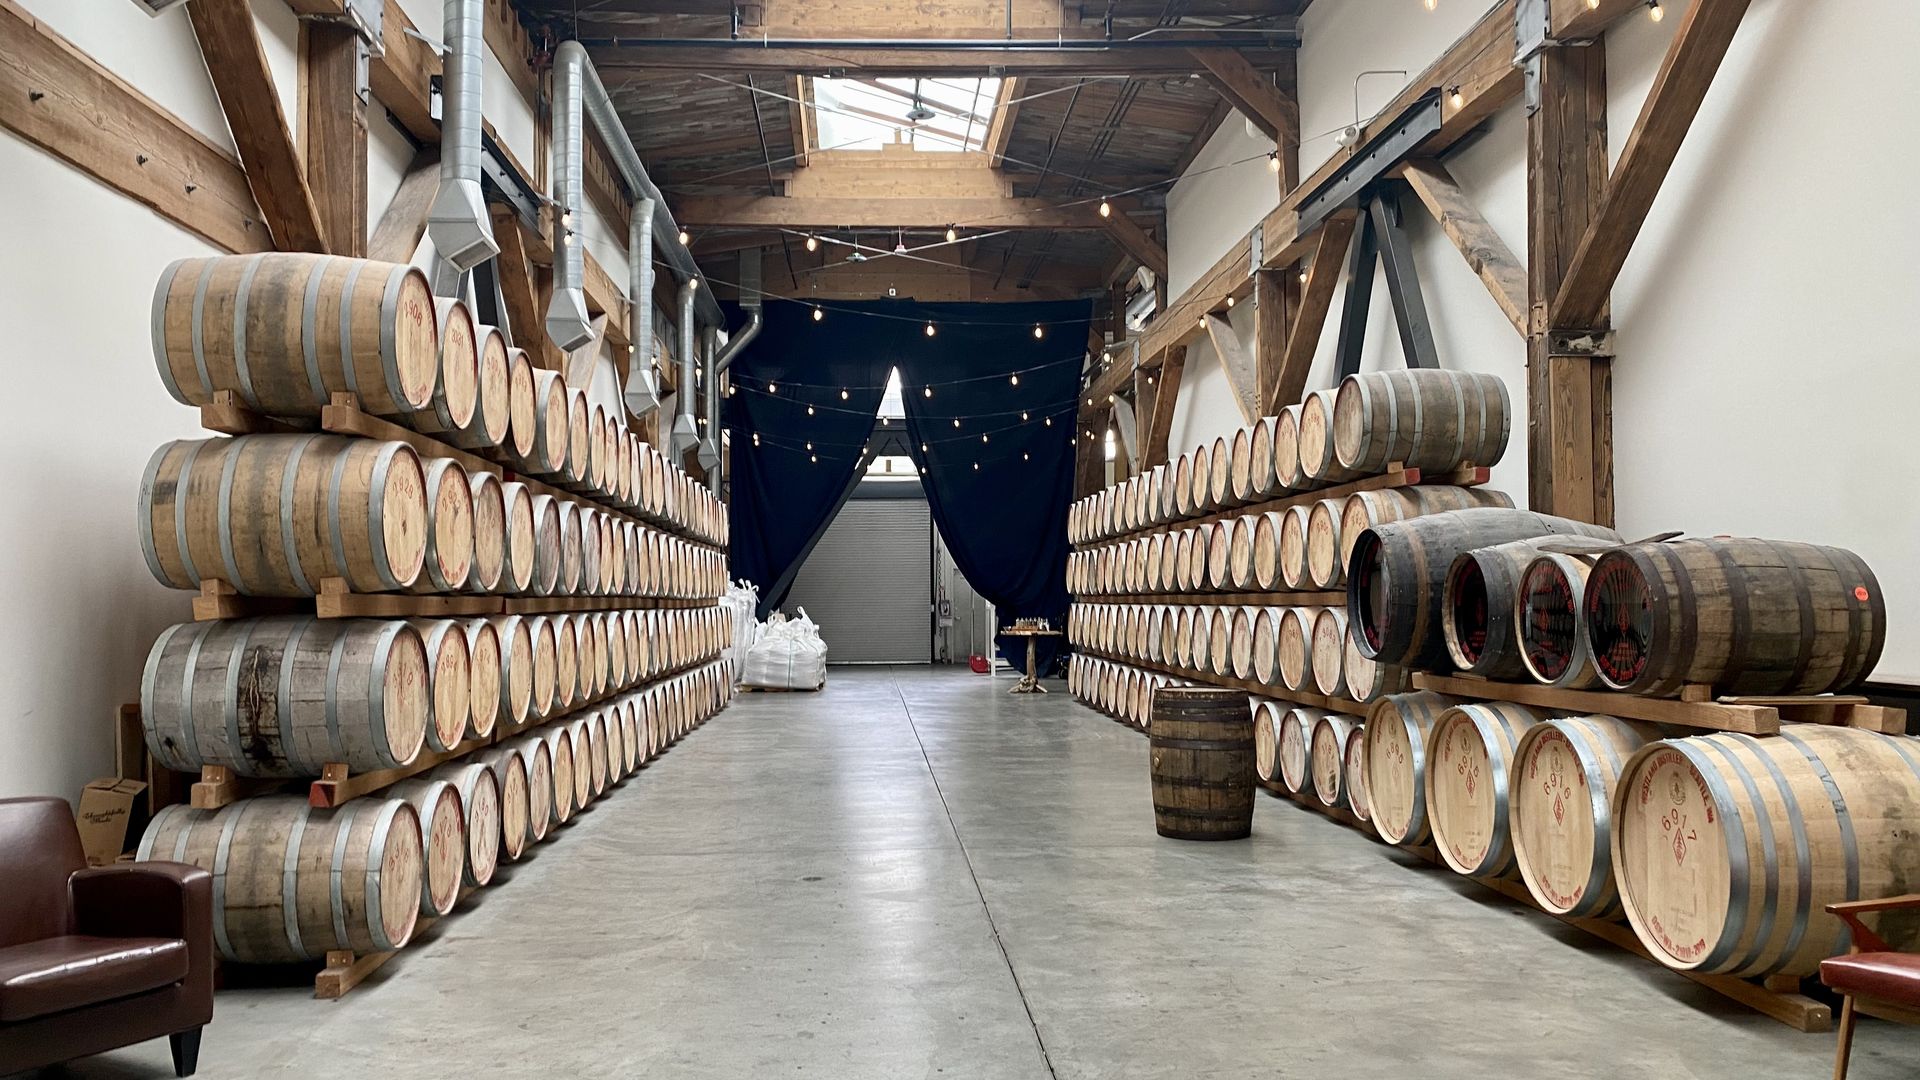 Barrels stacked along the walls in a room with polished concrete floors and skylight windows.